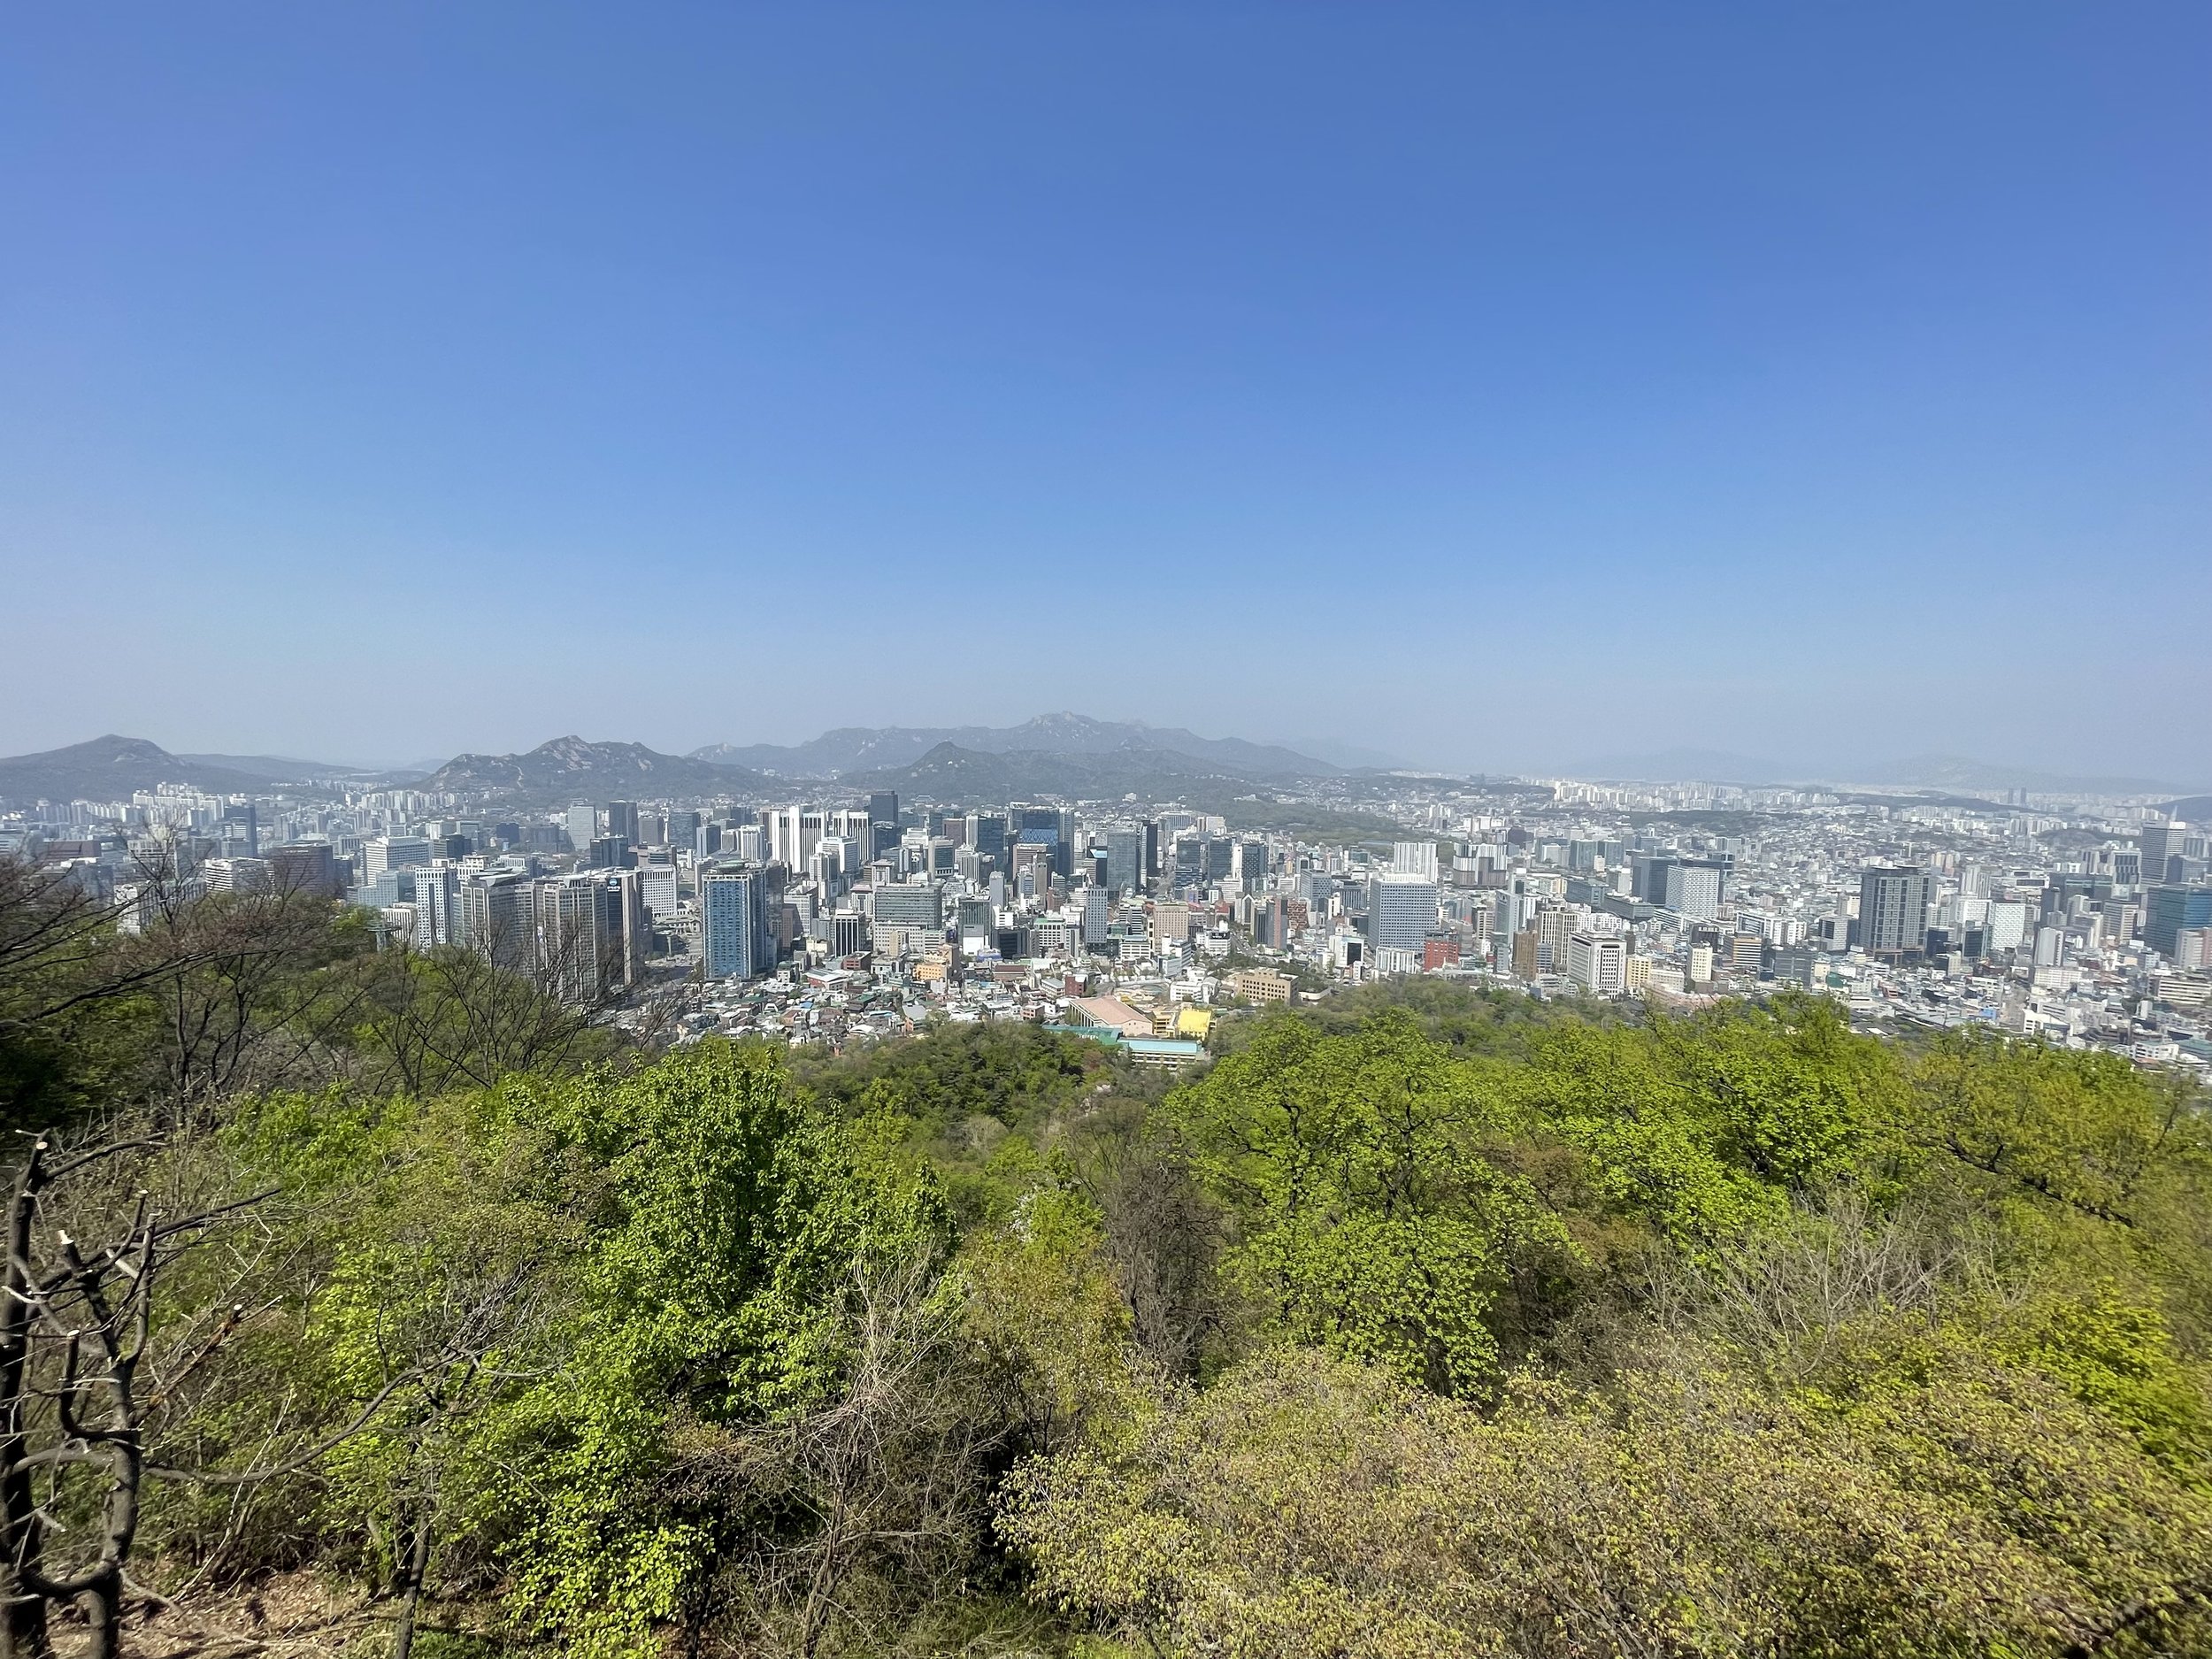 A view of part of Seoul,  looking over Myeongdong towards the north